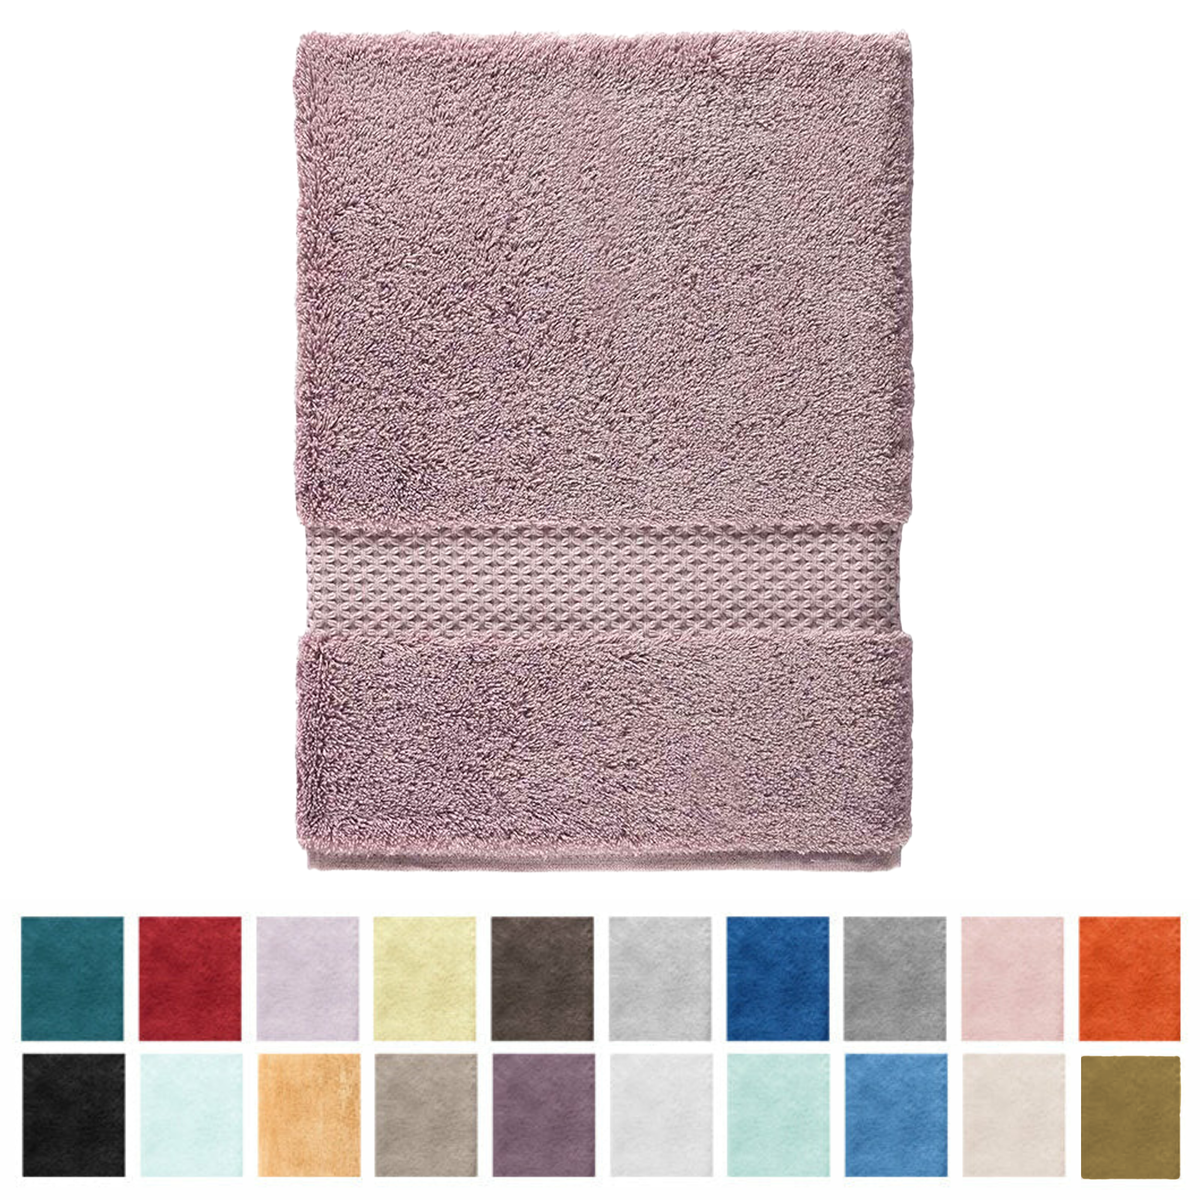 Color Swatch Samples Yves Delorme Etoile Bath Collection